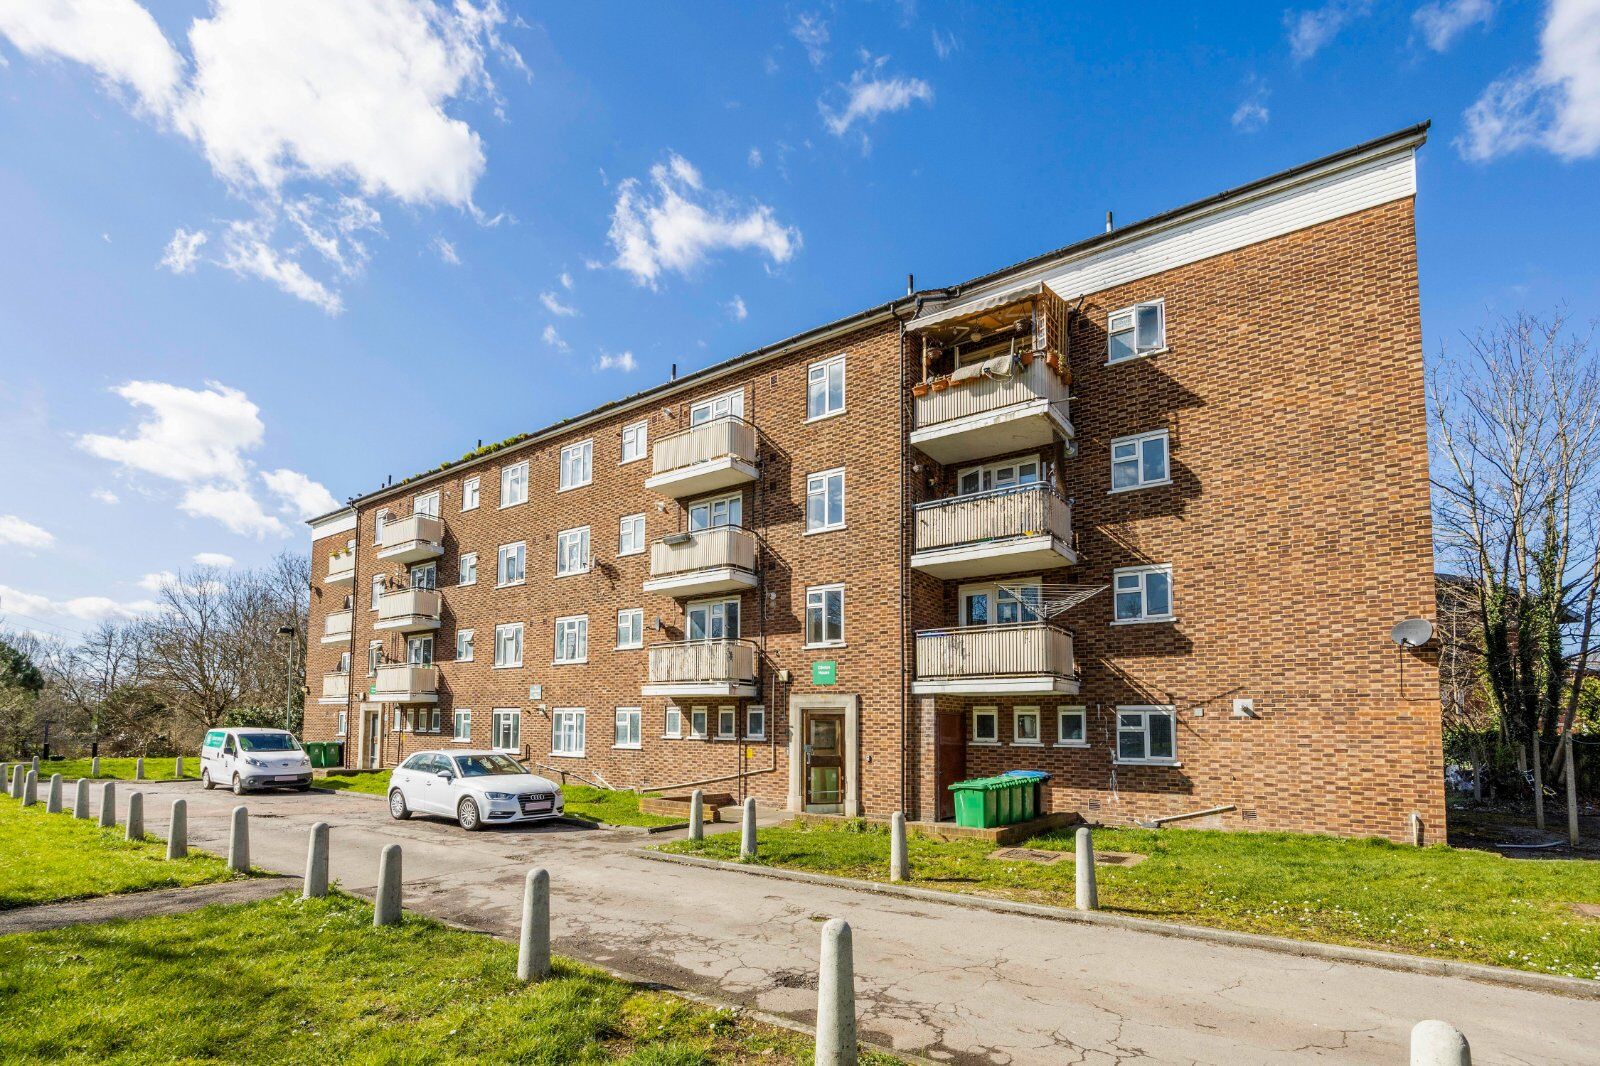 1 bedroom  flat for sale Clinton House, Sheephouse Way, KT3, main image